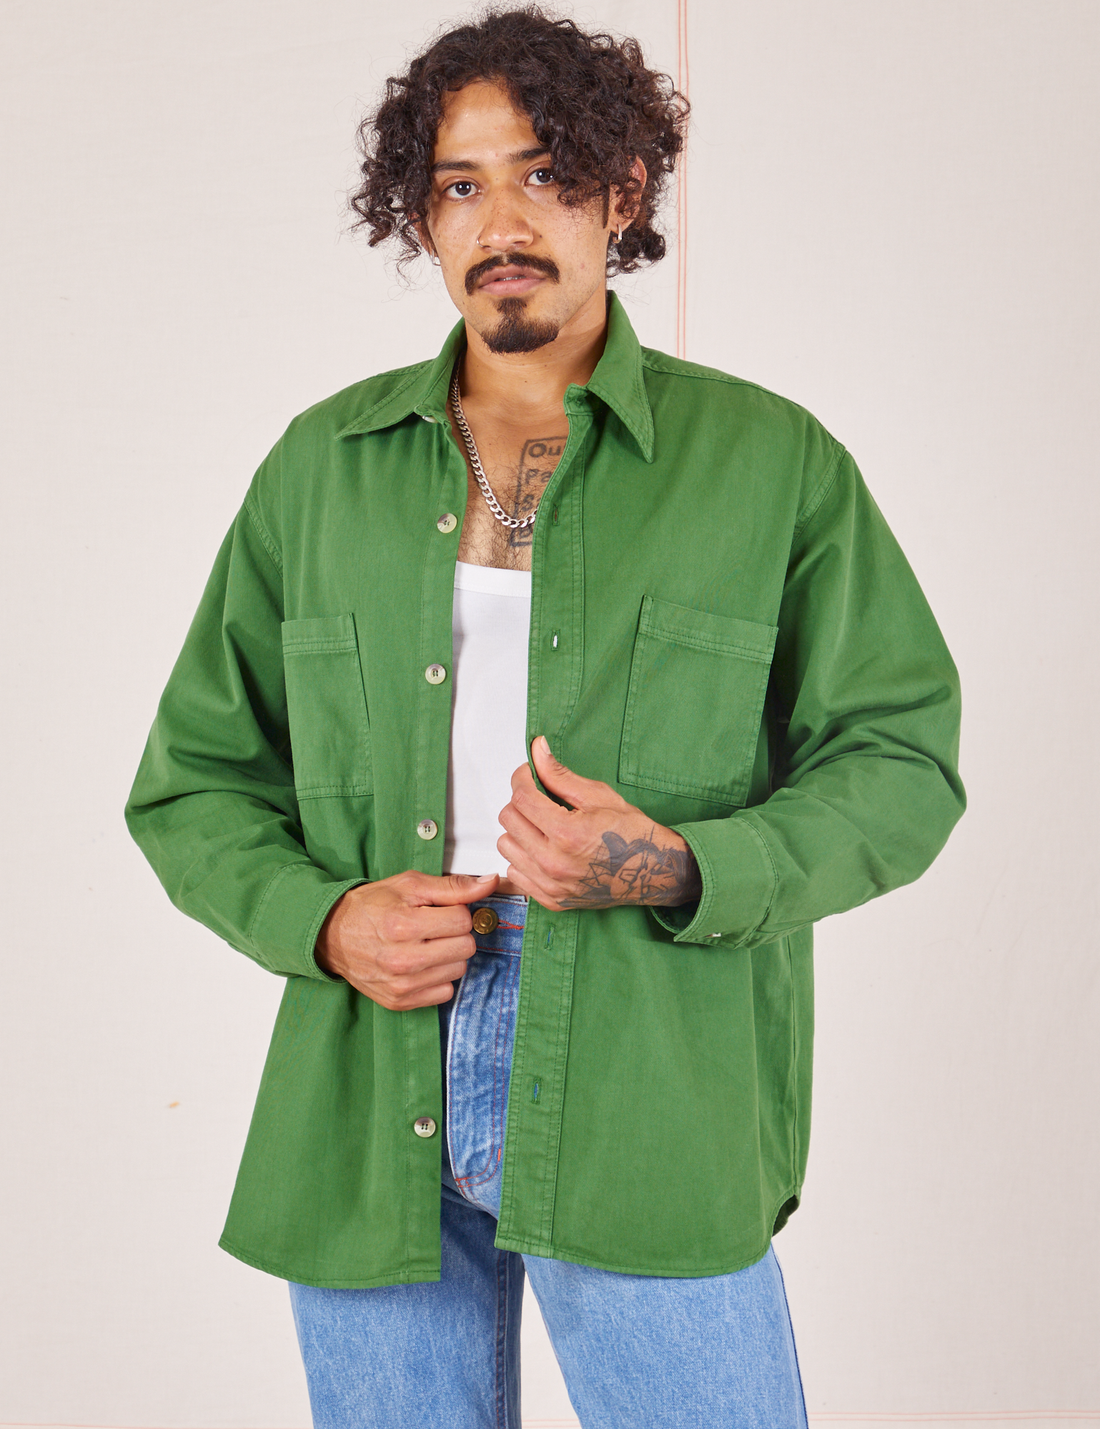 Jesse is wearing Oversize Overshirt in Lawn Green and vintage off-white Cropped Tank Top